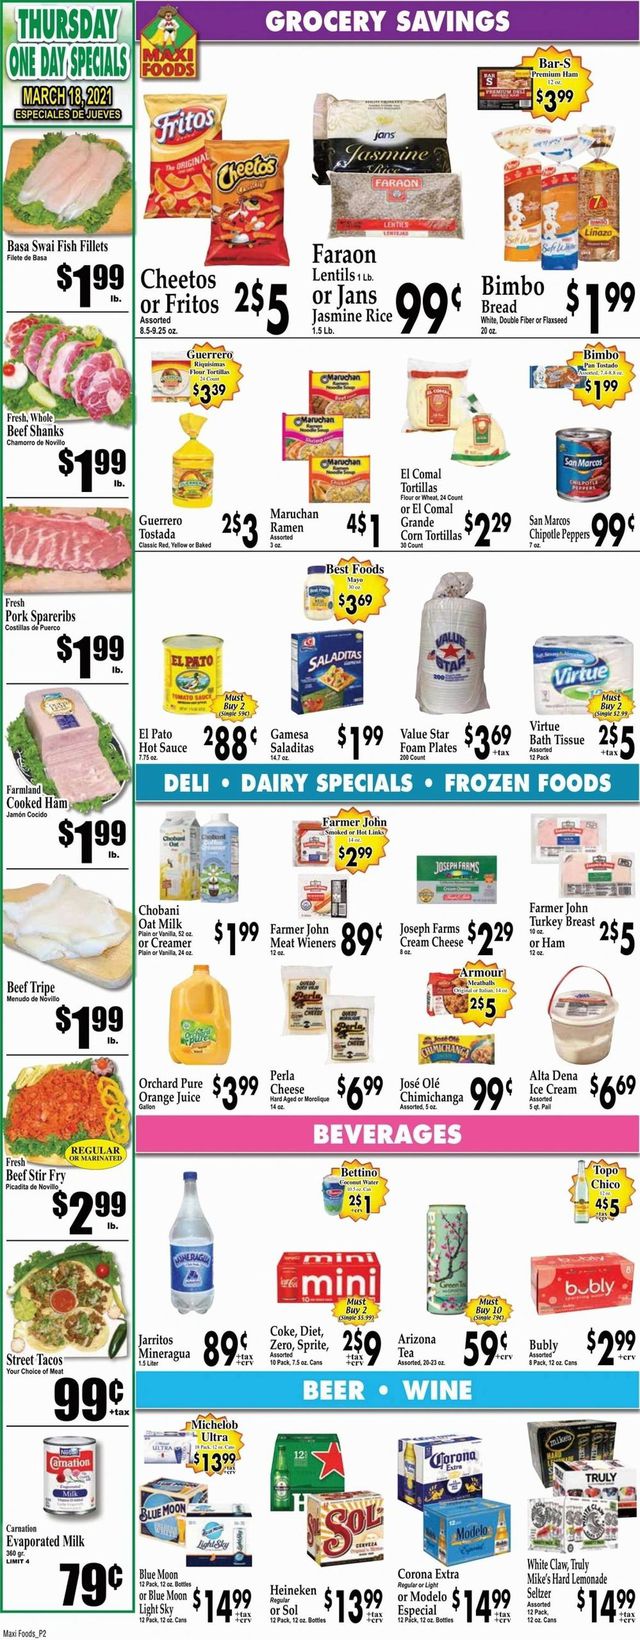 Maxi Foods Ad from 03/17/2021